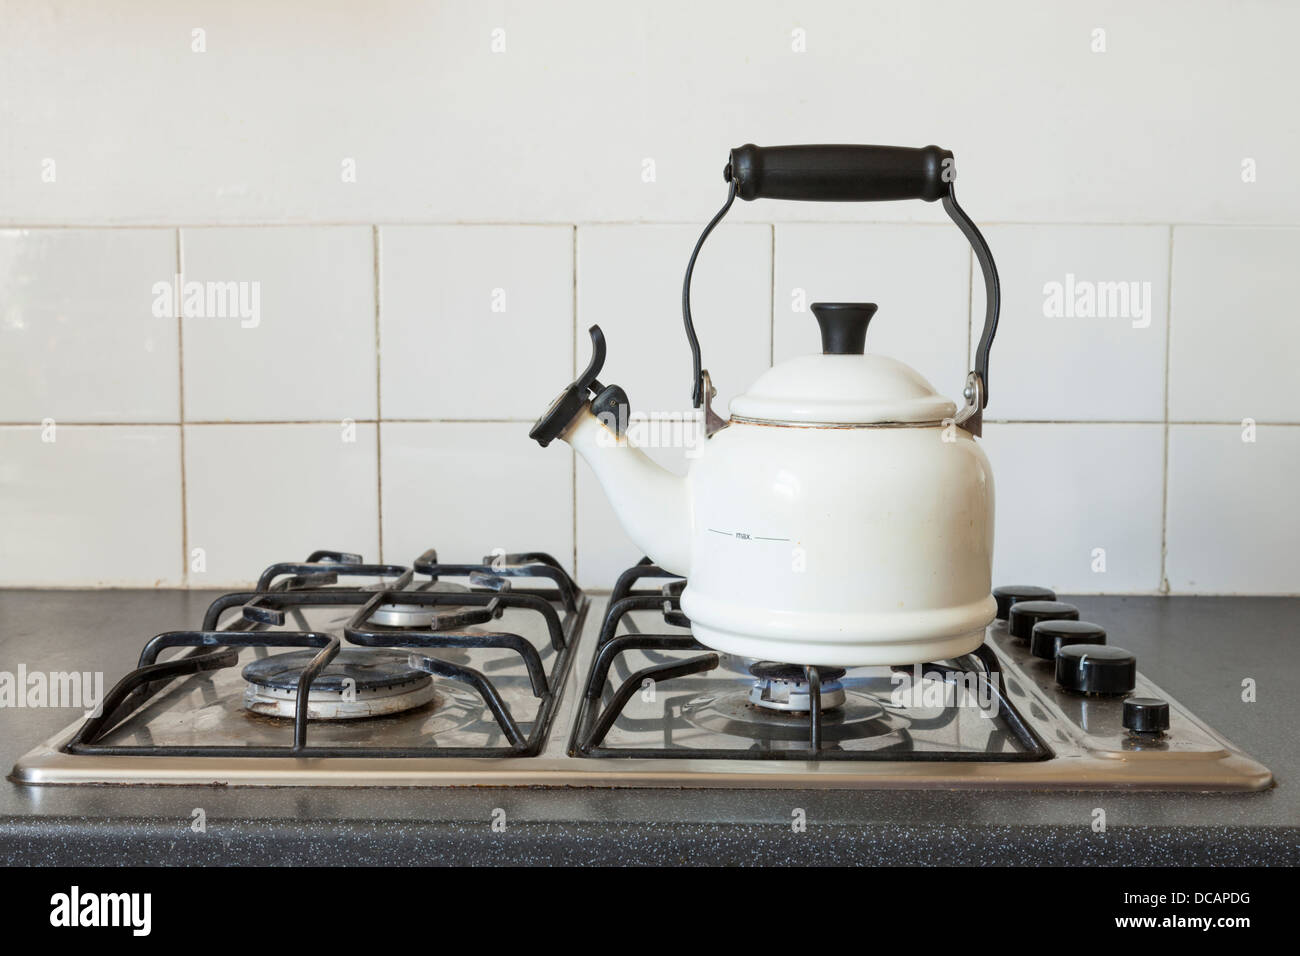 Kettle on a hob of a gas cooker, England, UK Stock Photo